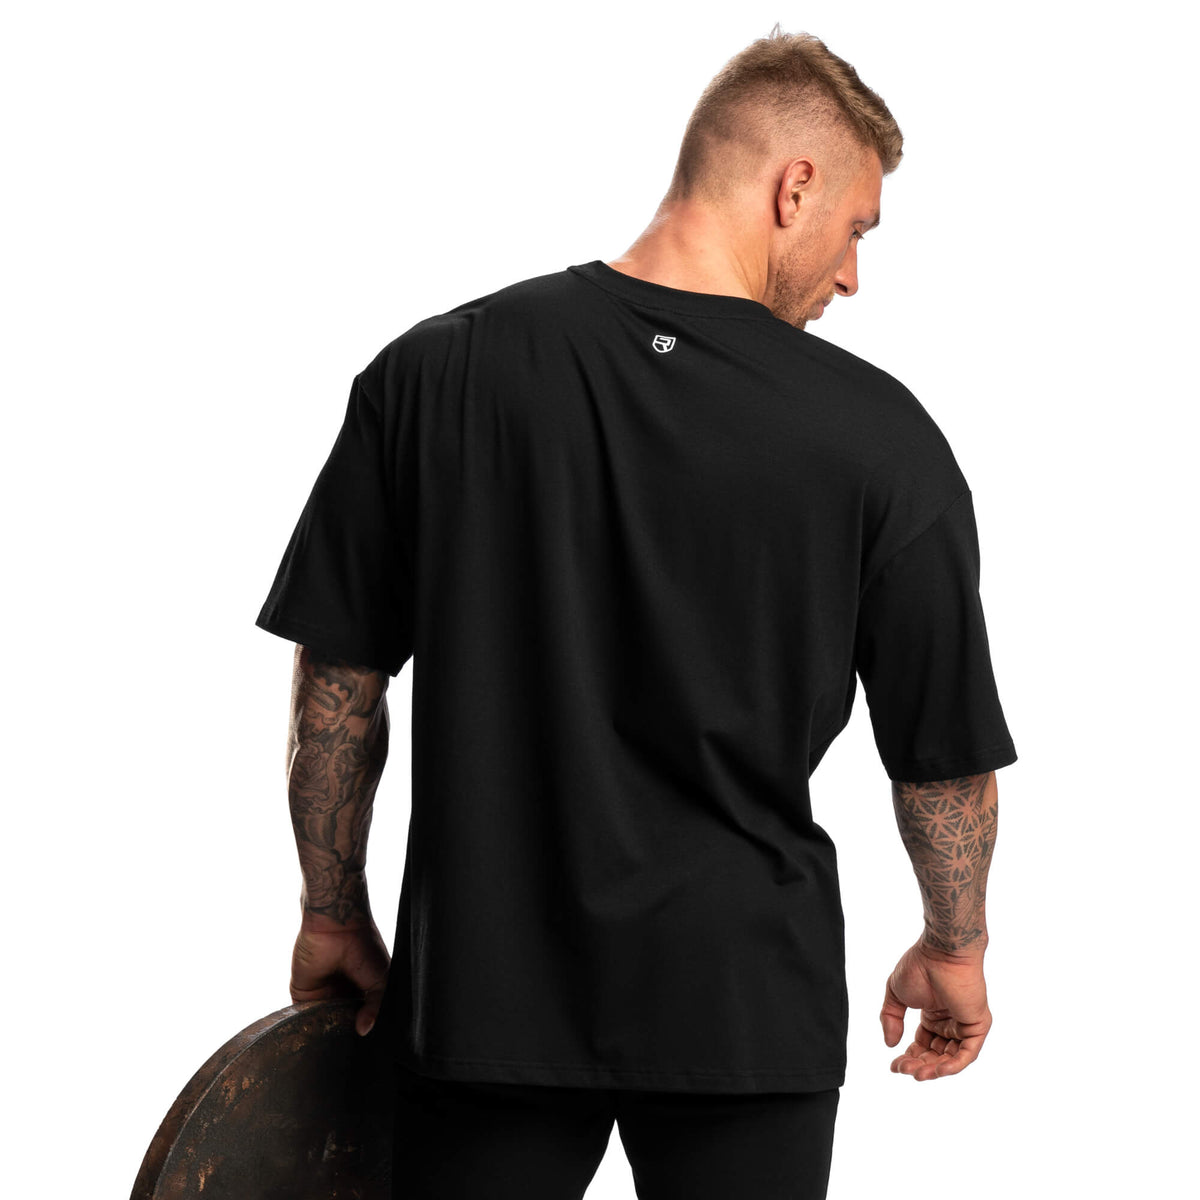 Under Armour Training sport oversized t-shirt in black